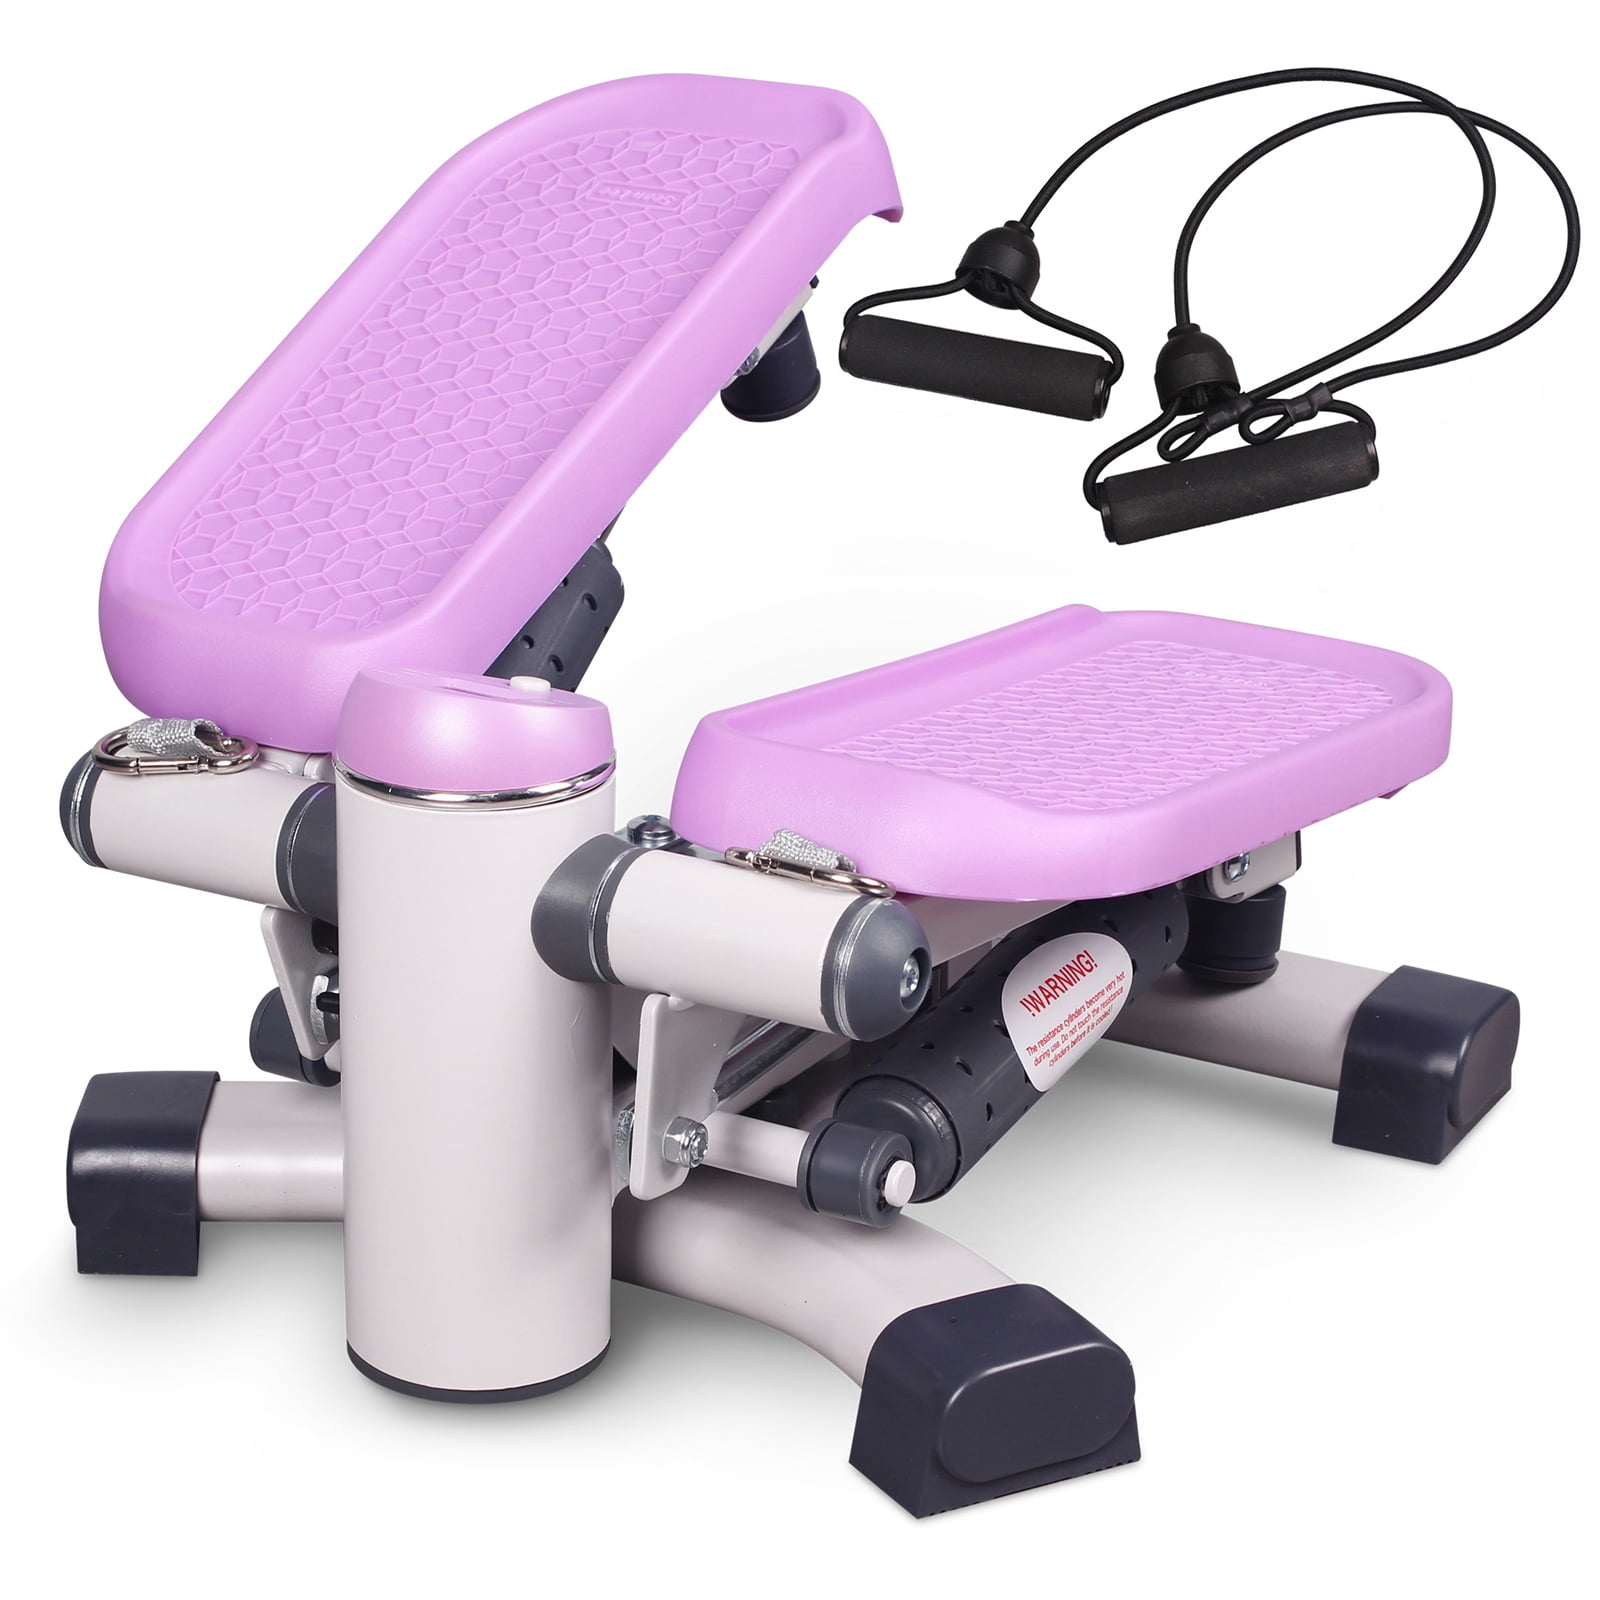 Multifunctional Stepper Exercise Machine Equipment for home/office CA Free Ship 